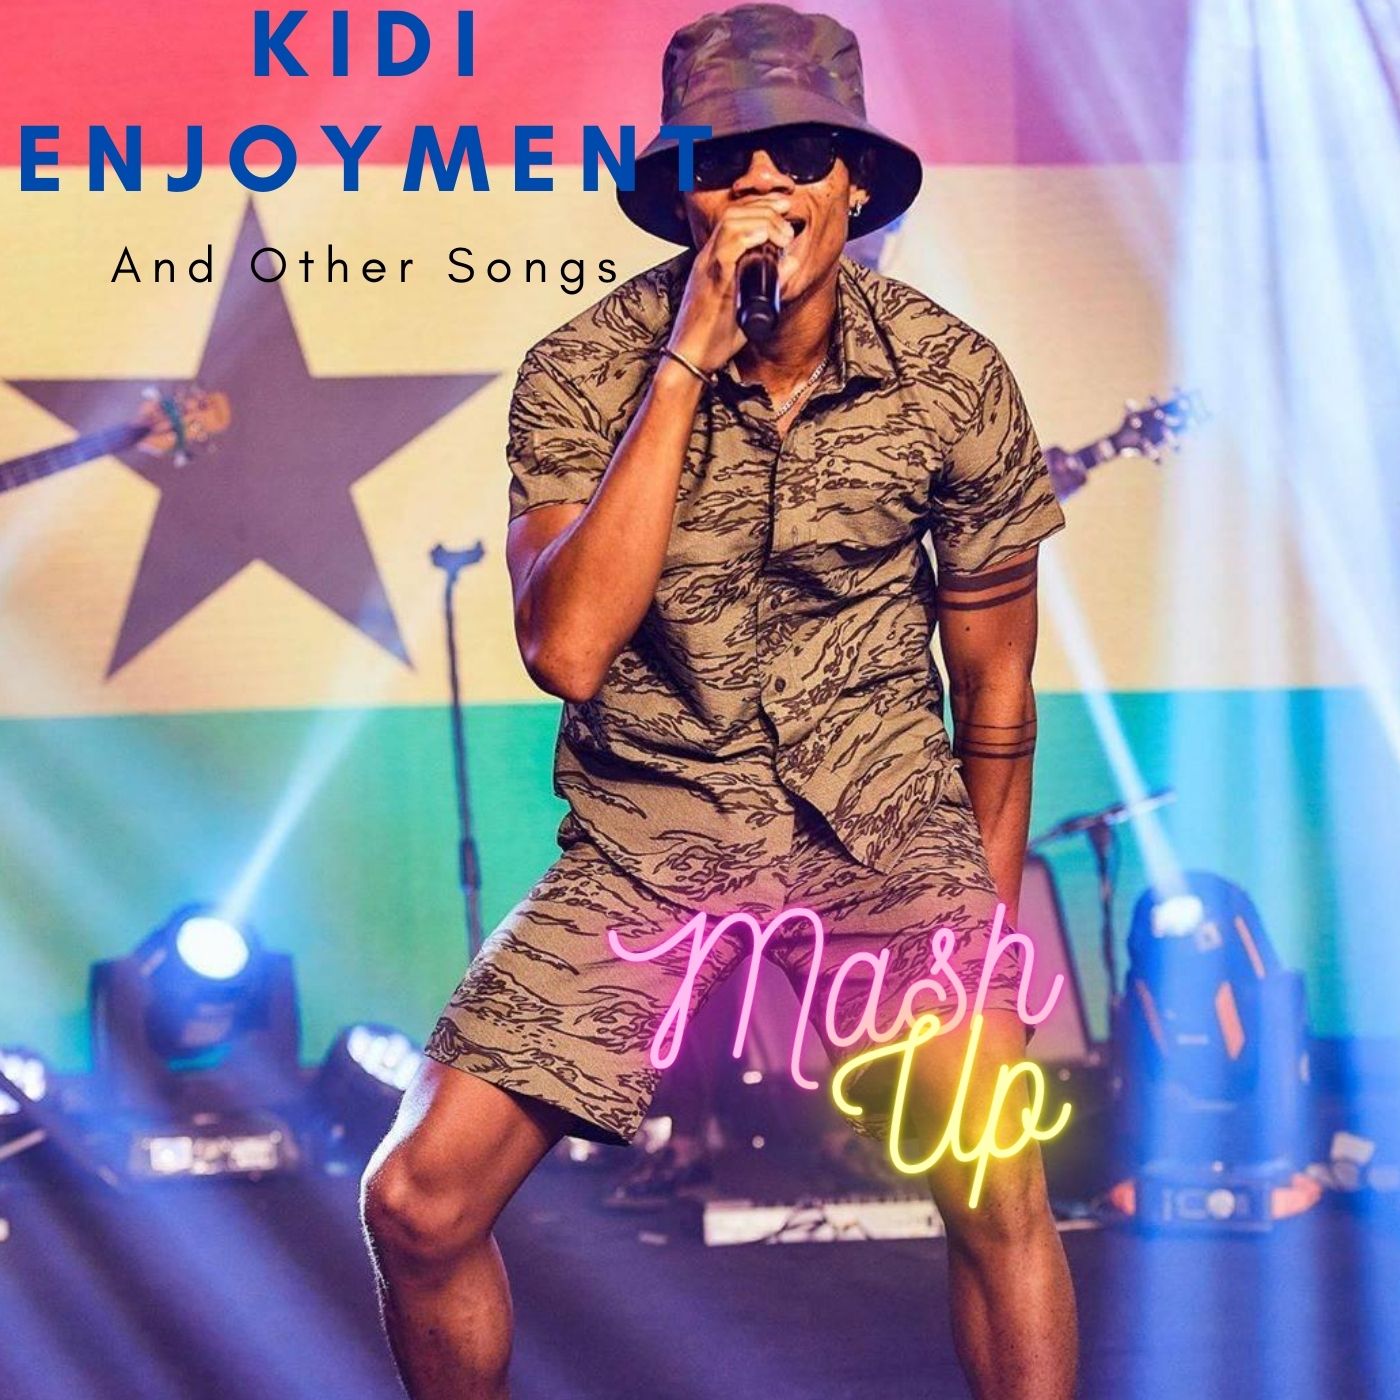 Maxi Konnect - Kidi Enjoyment and Other Songs Mash Up